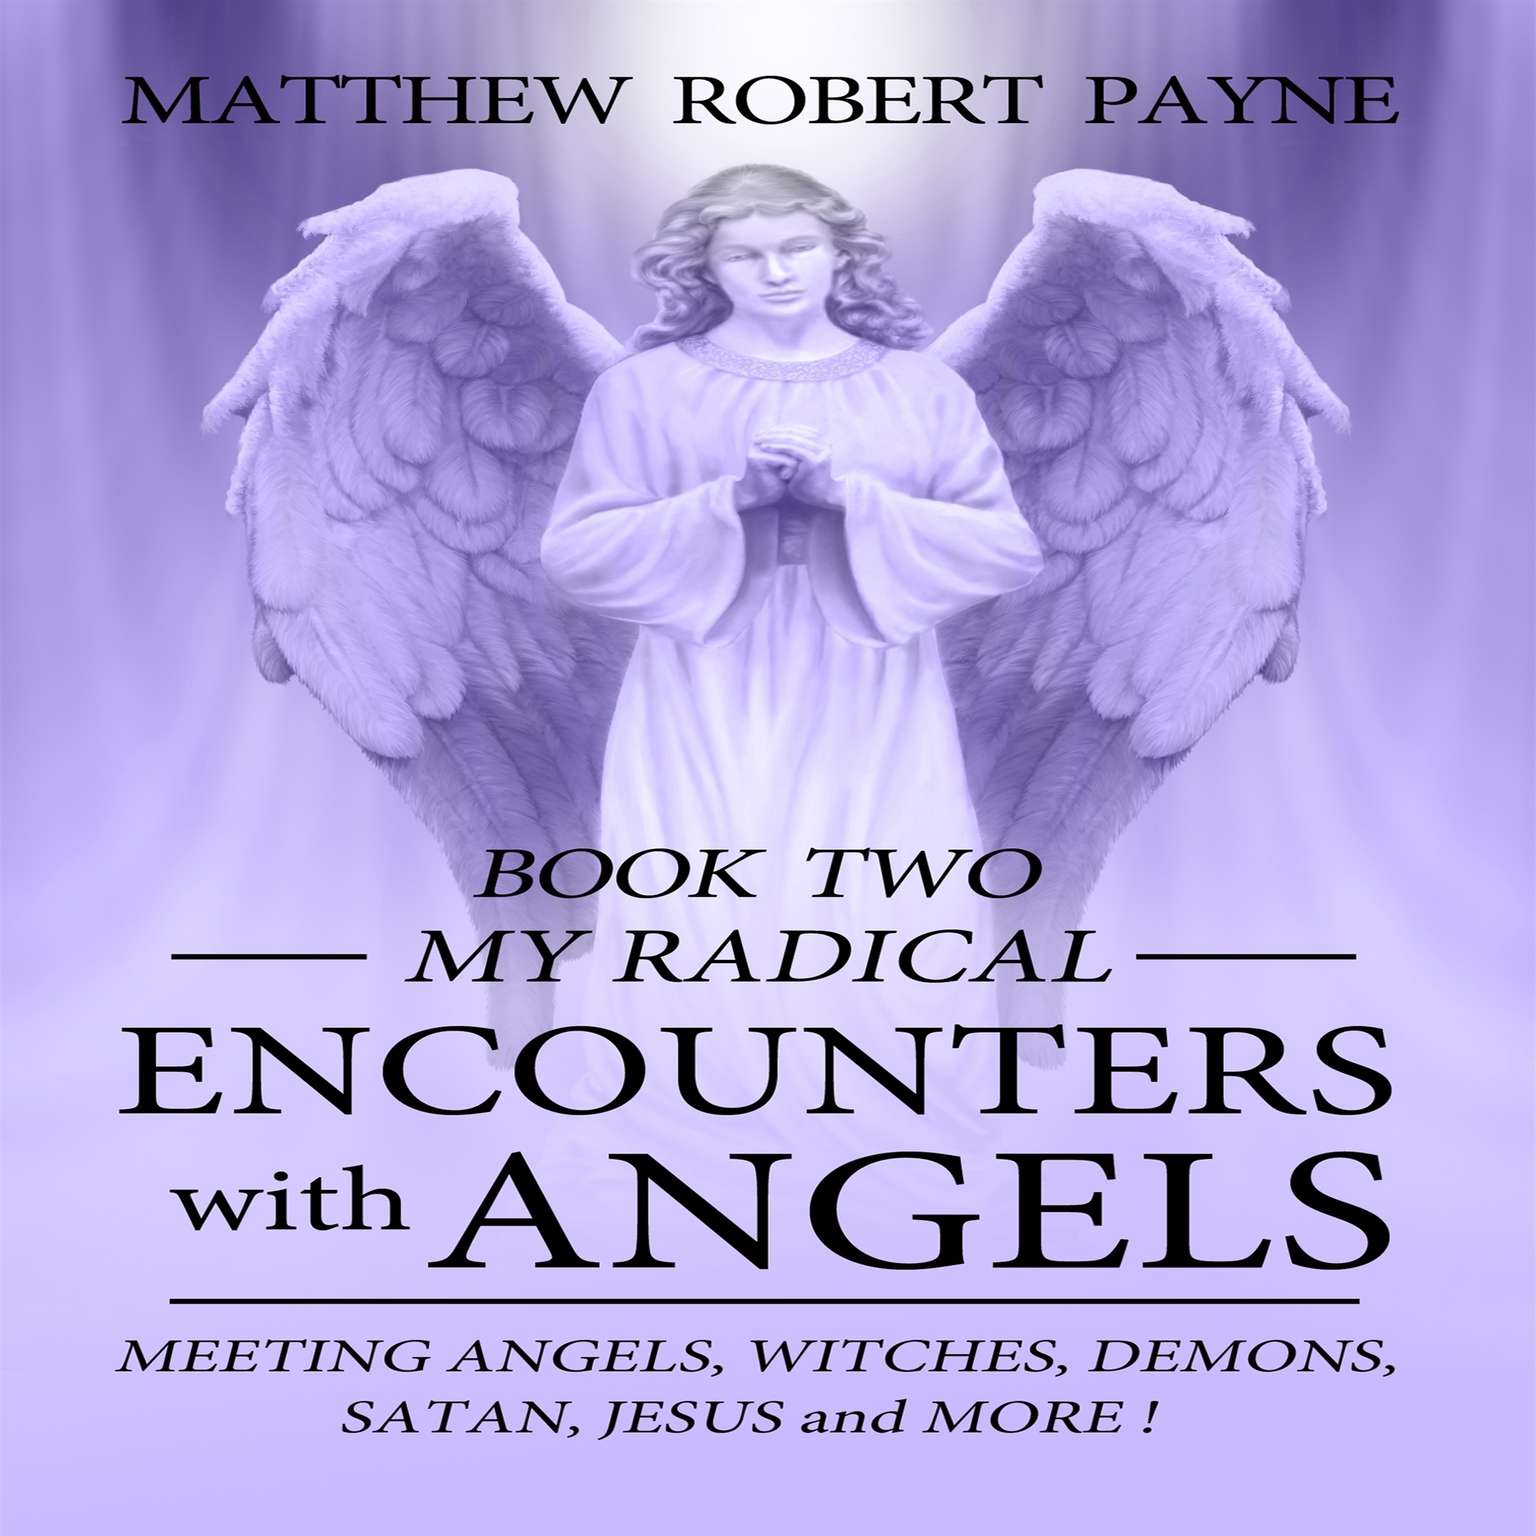 My Radical Encounters with Angels Audiobook, by Matthew Robert Payne  